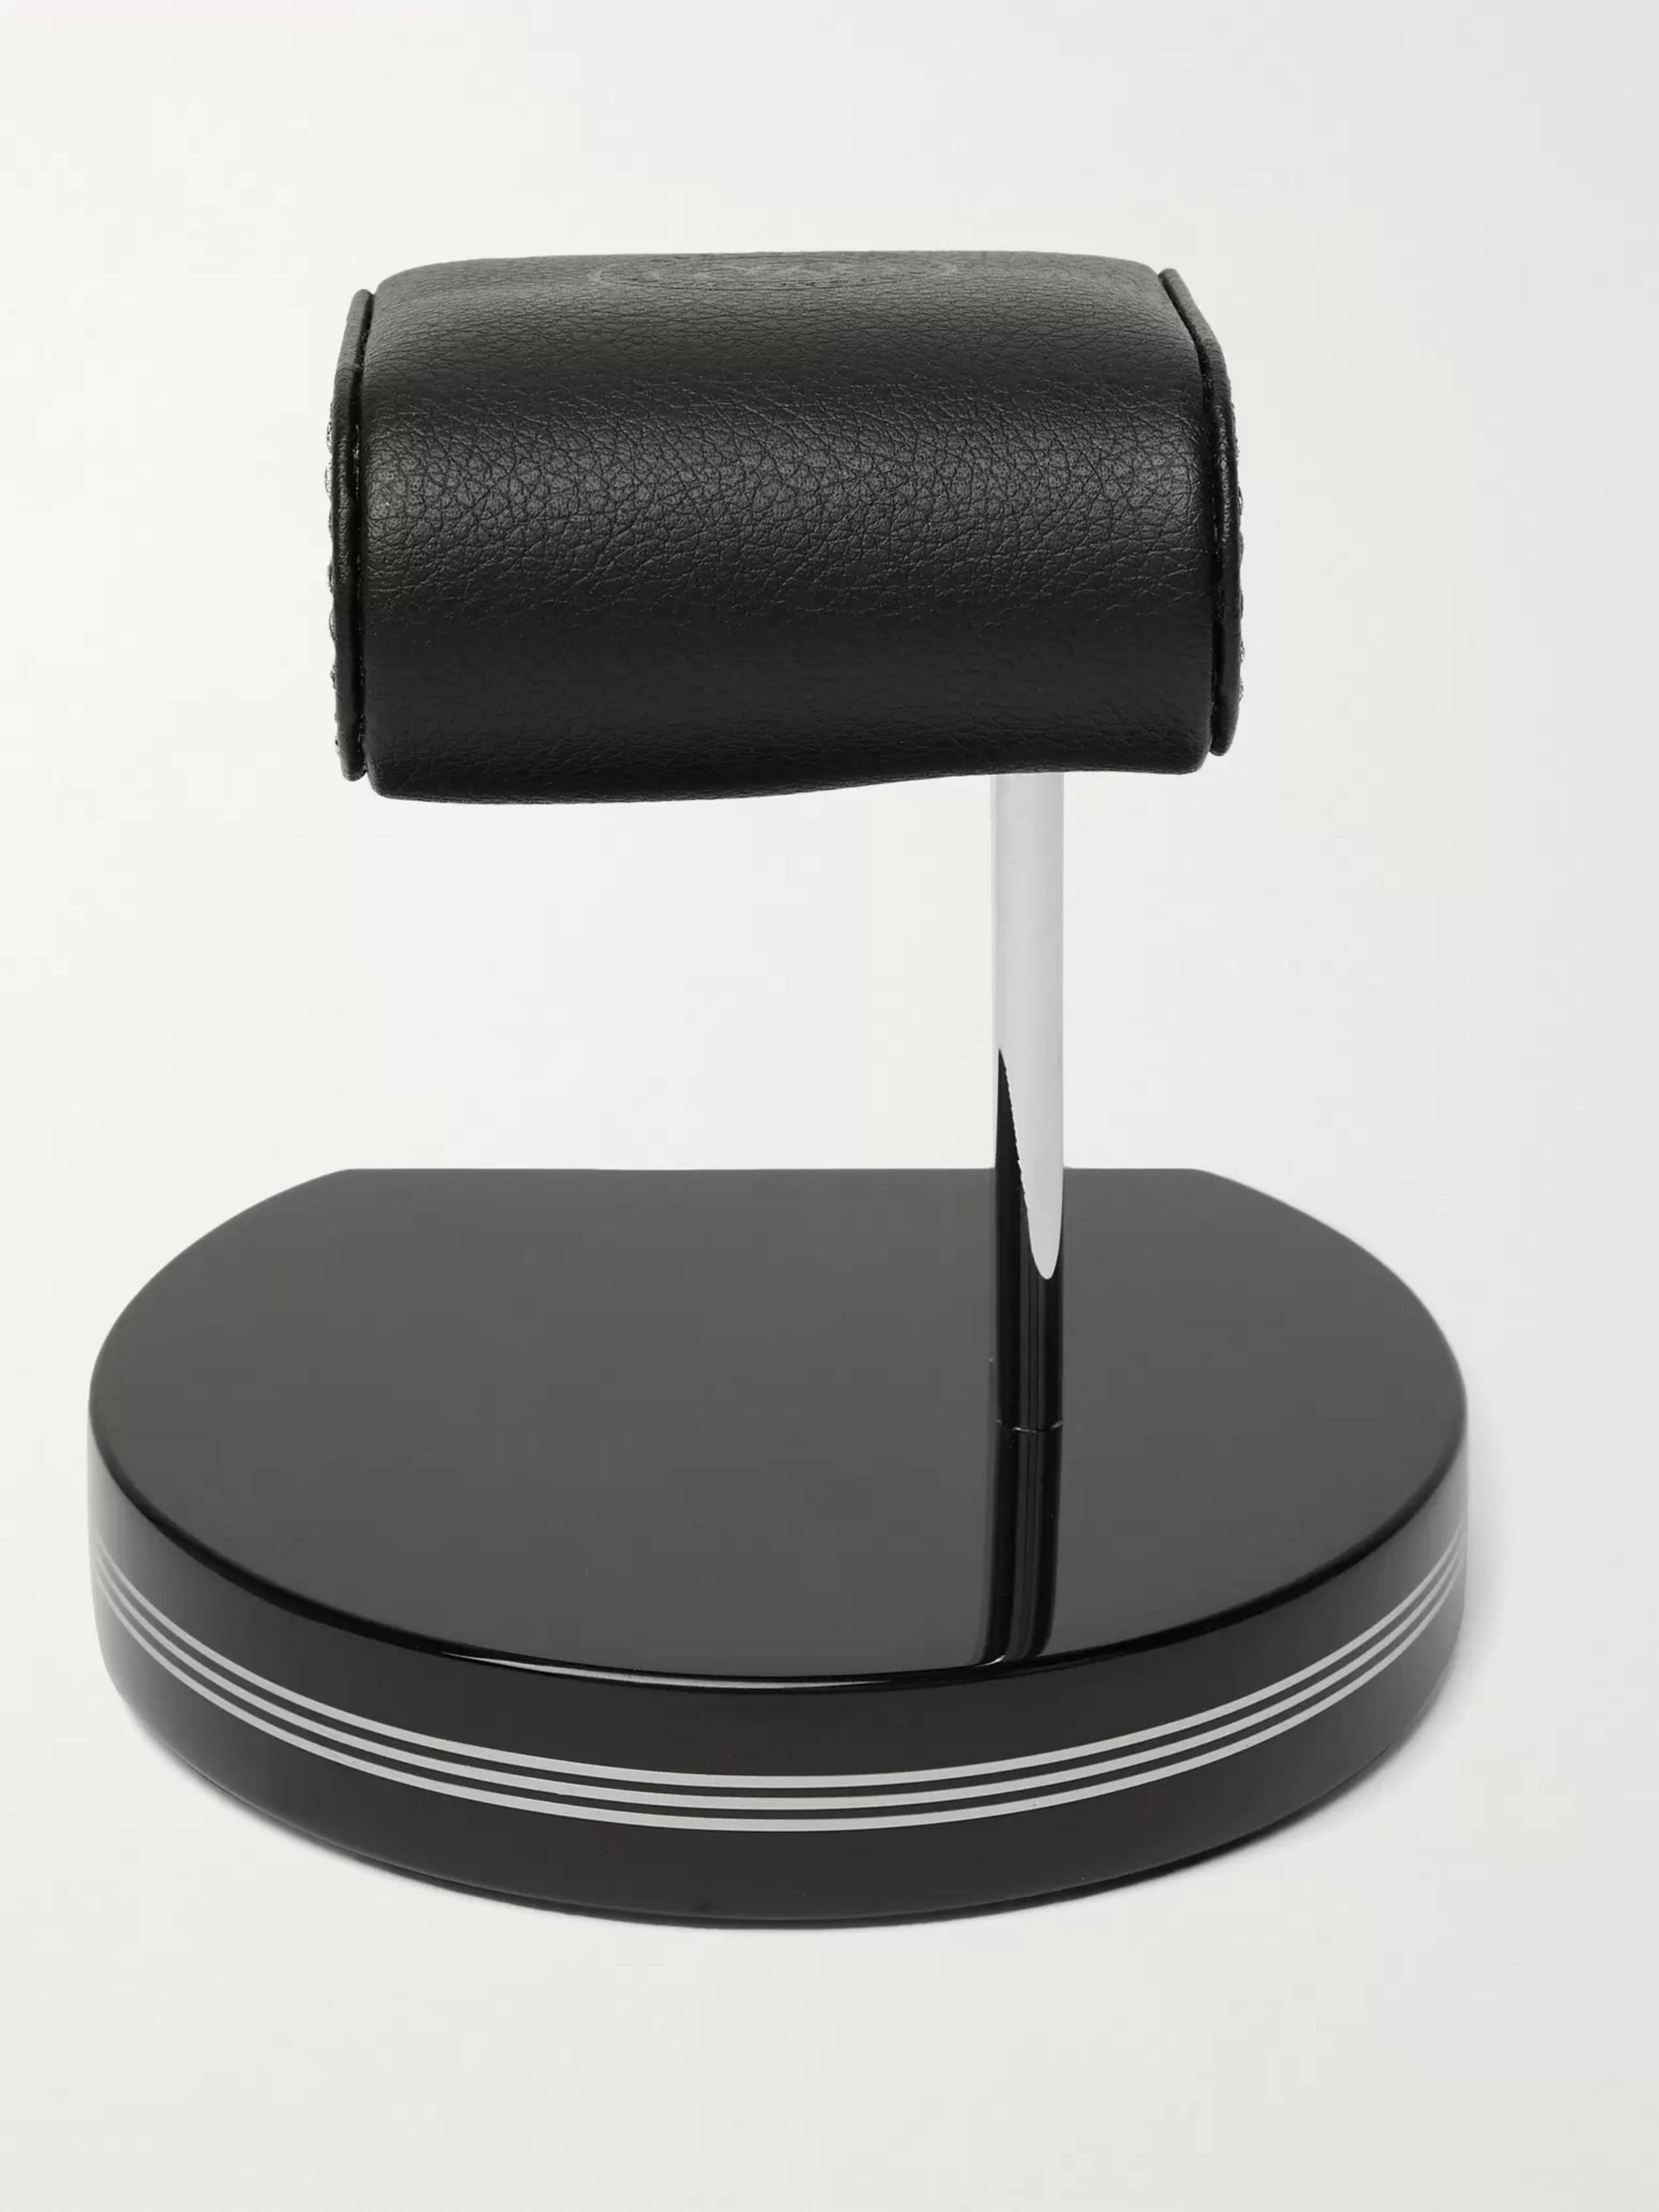 RAPPORT LONDON Formula Full-Grain Leather Watch Stand